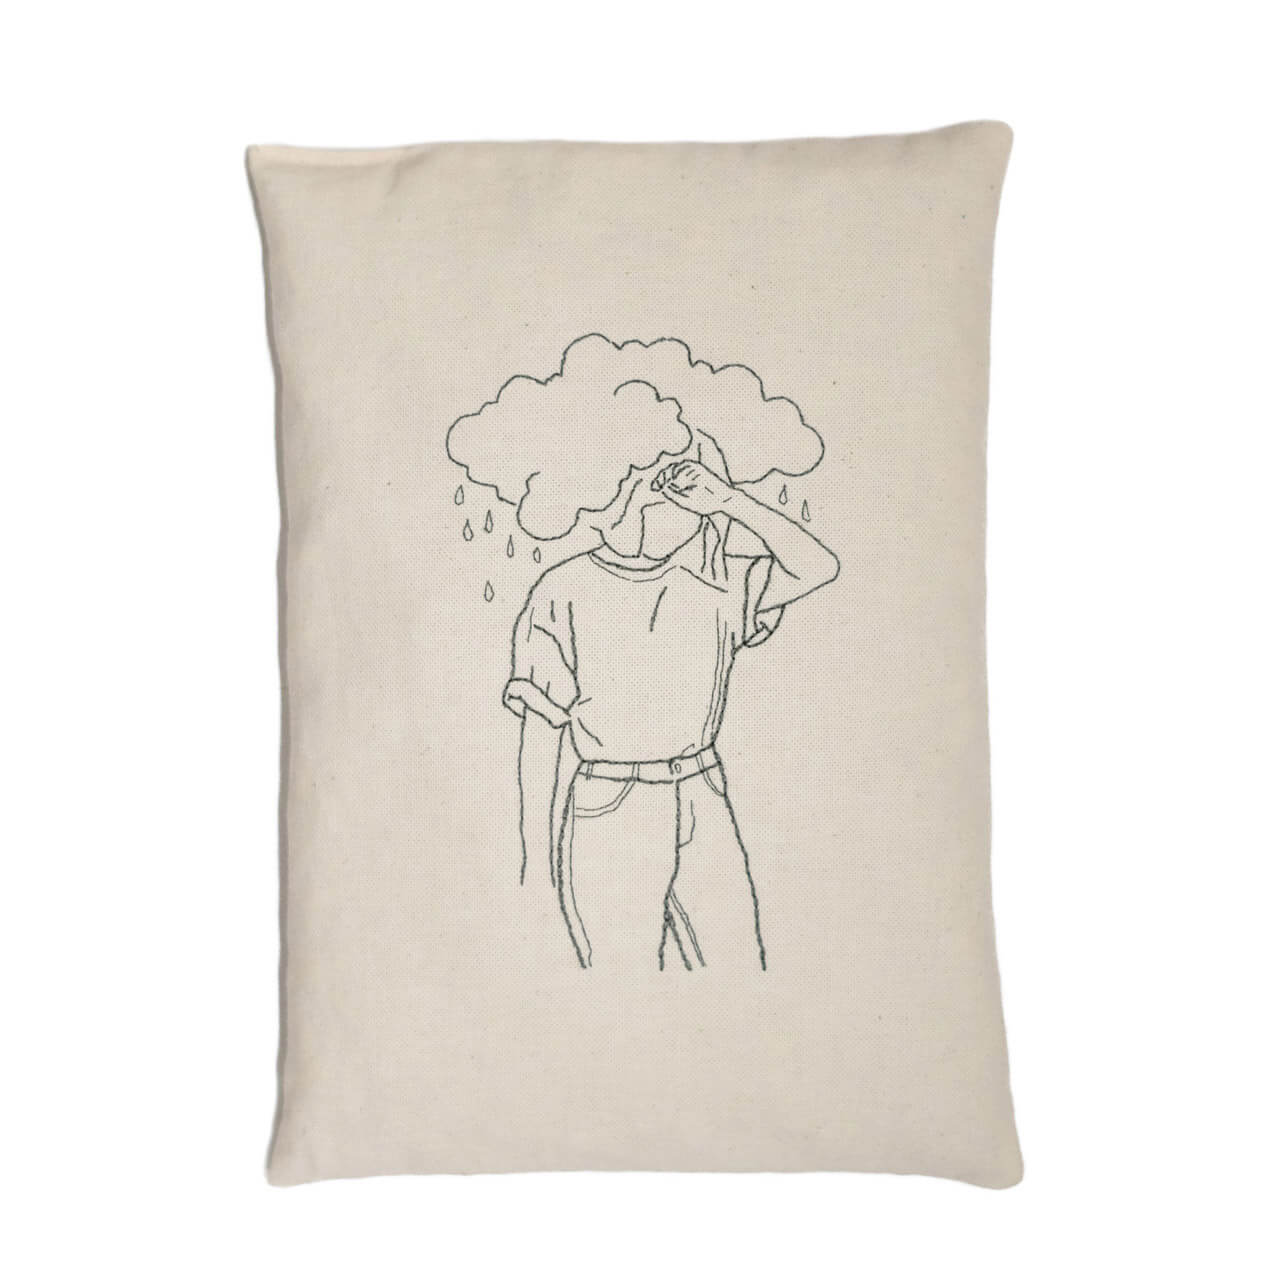 Clouded Girl • Cherry Stone Pillow